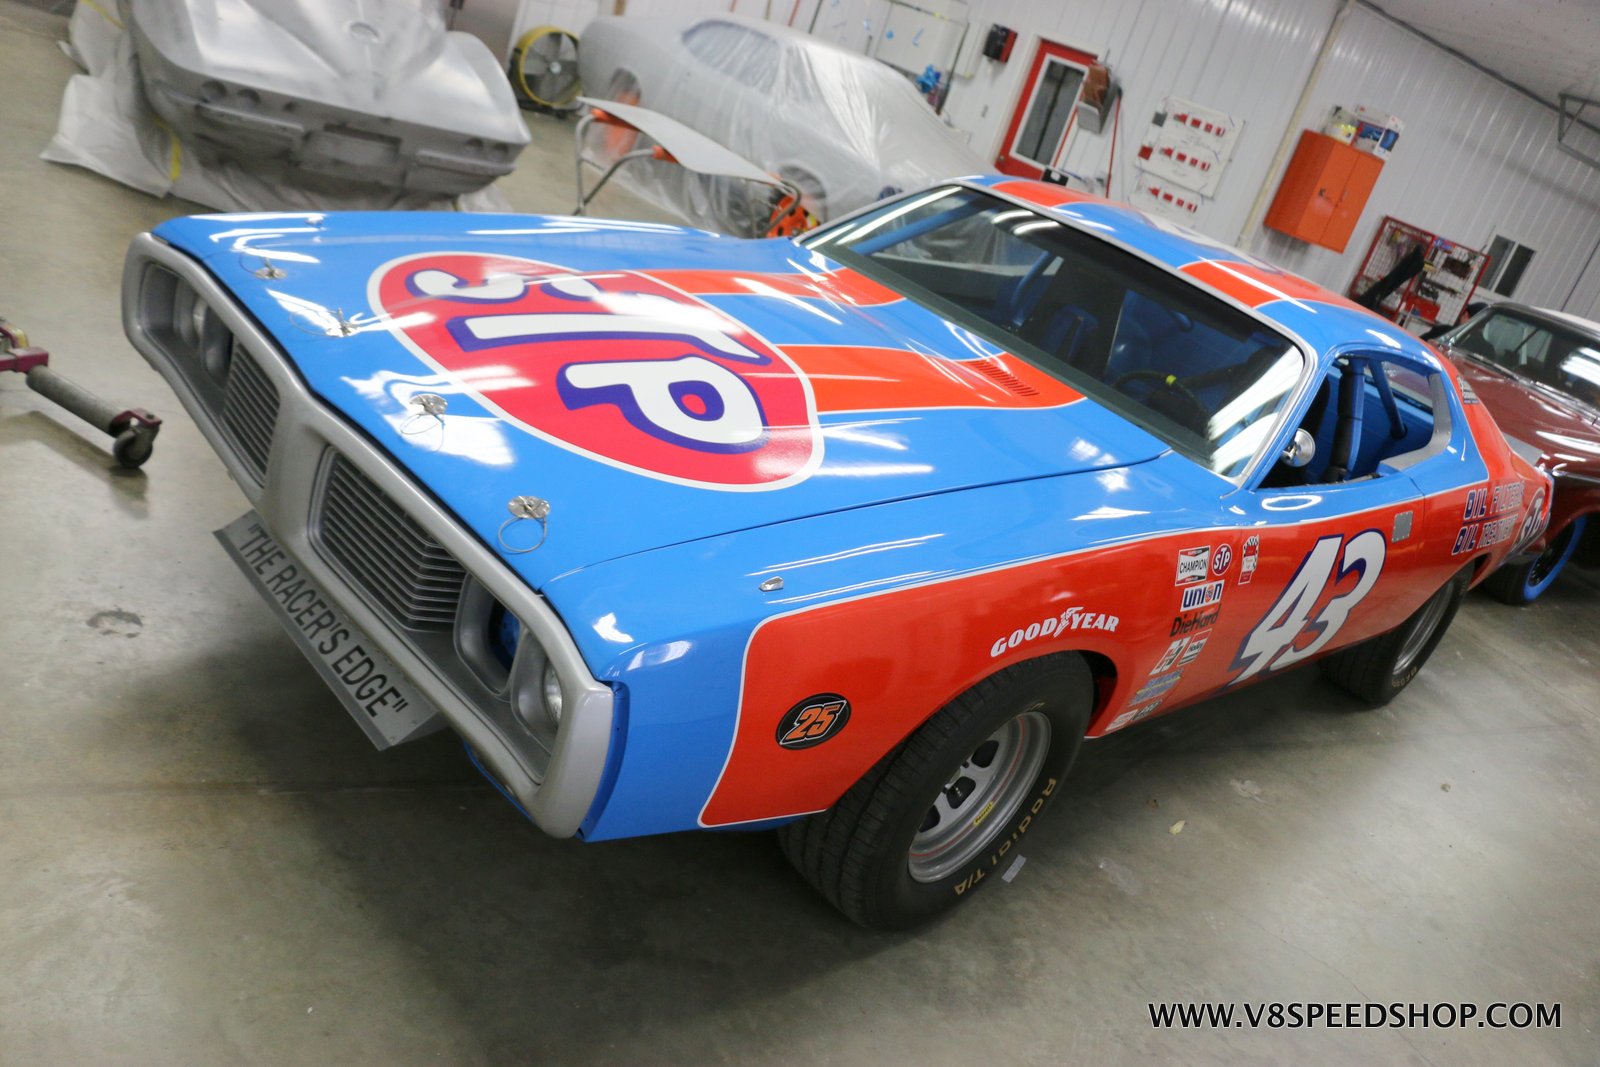 1973 Dodge Charger Richard Petty Stock Car Maintenance at V8 Speed and Resto Shop